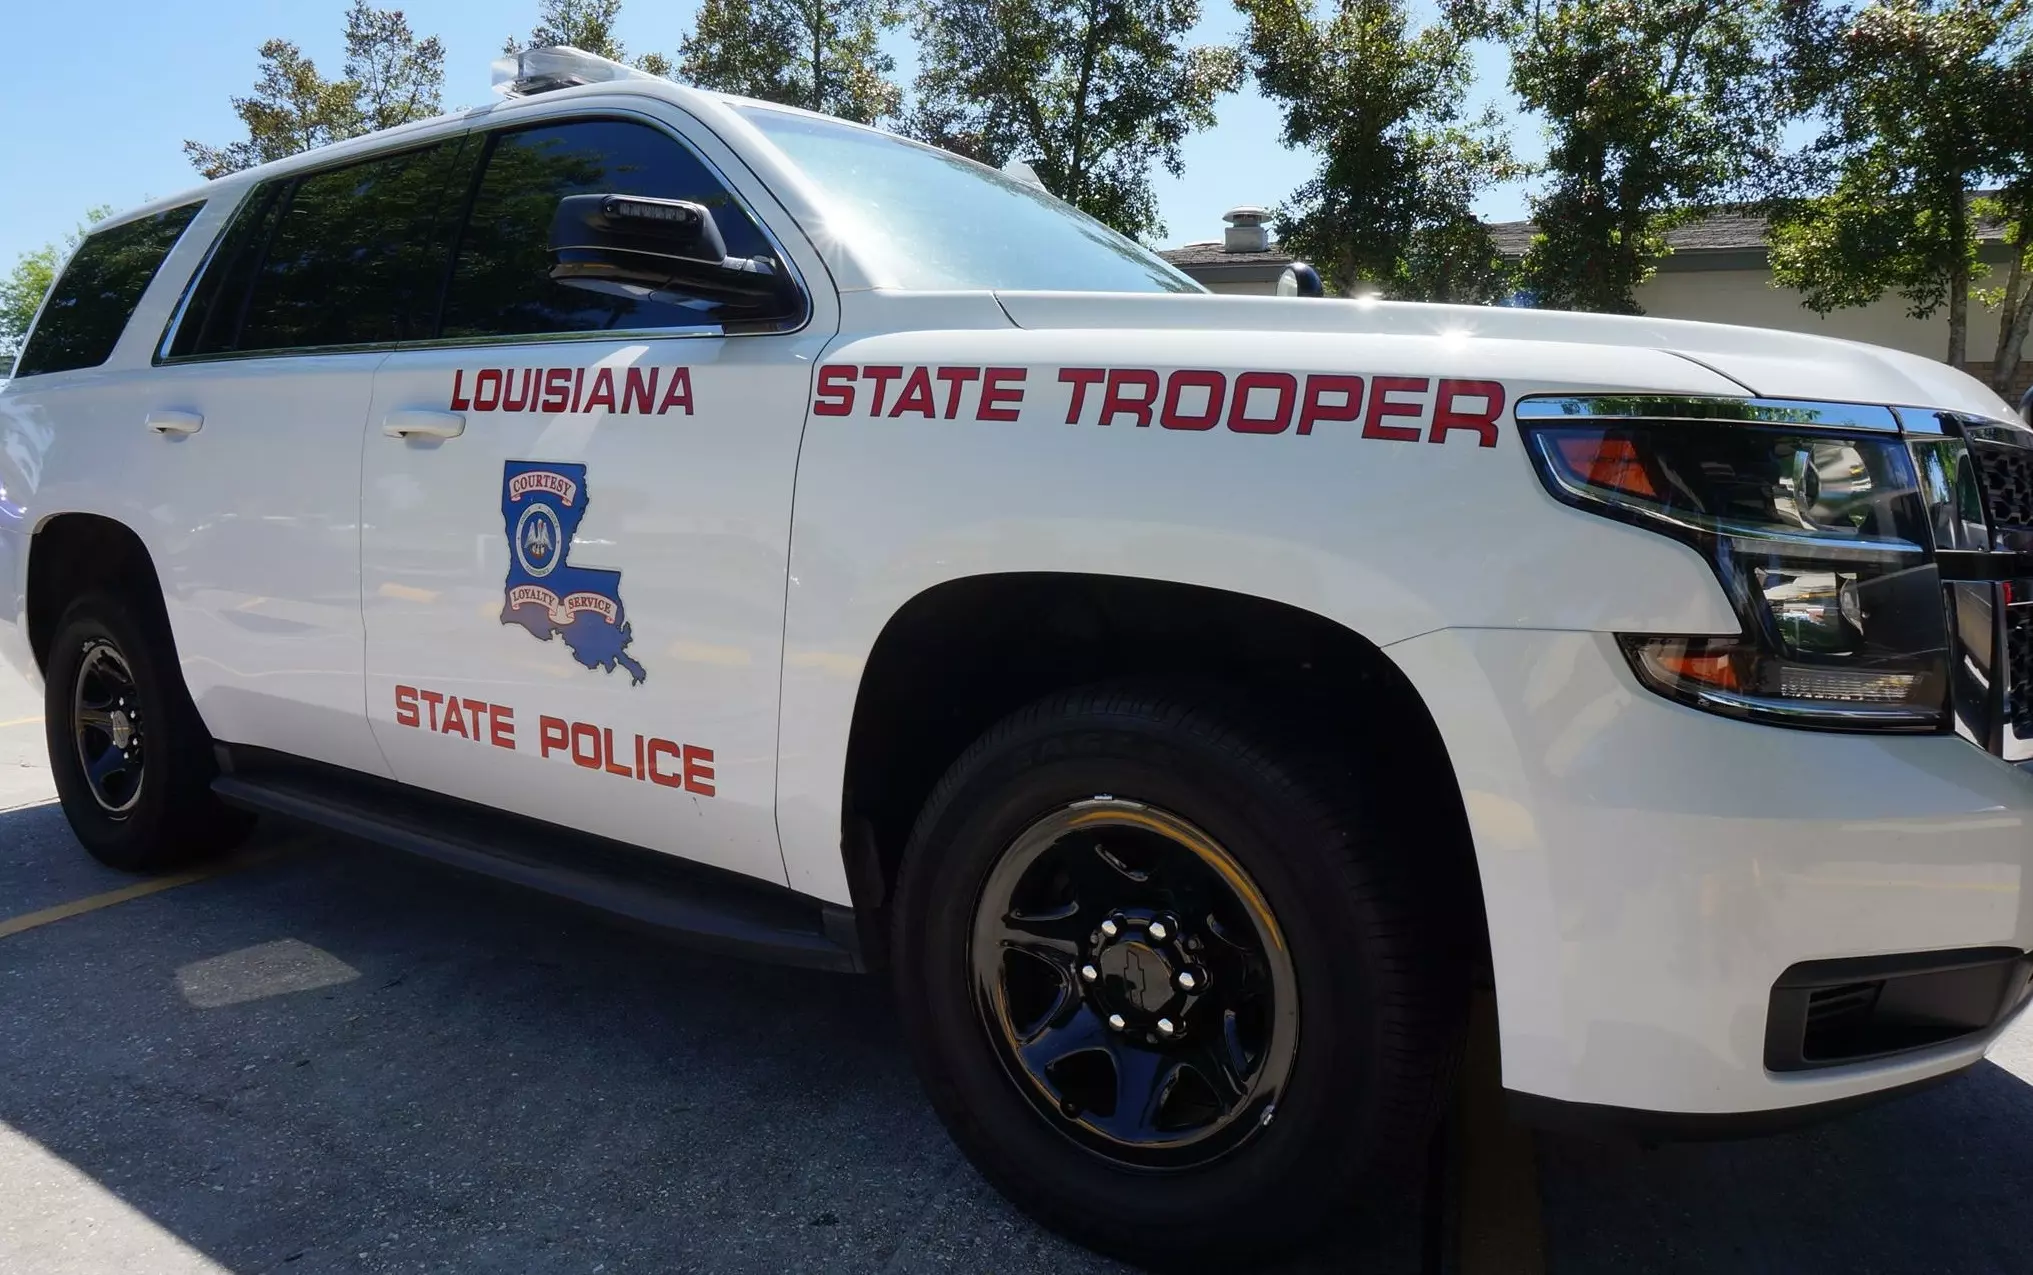 Louisiana State Police Commissioner Exits Amid Corruption Claims